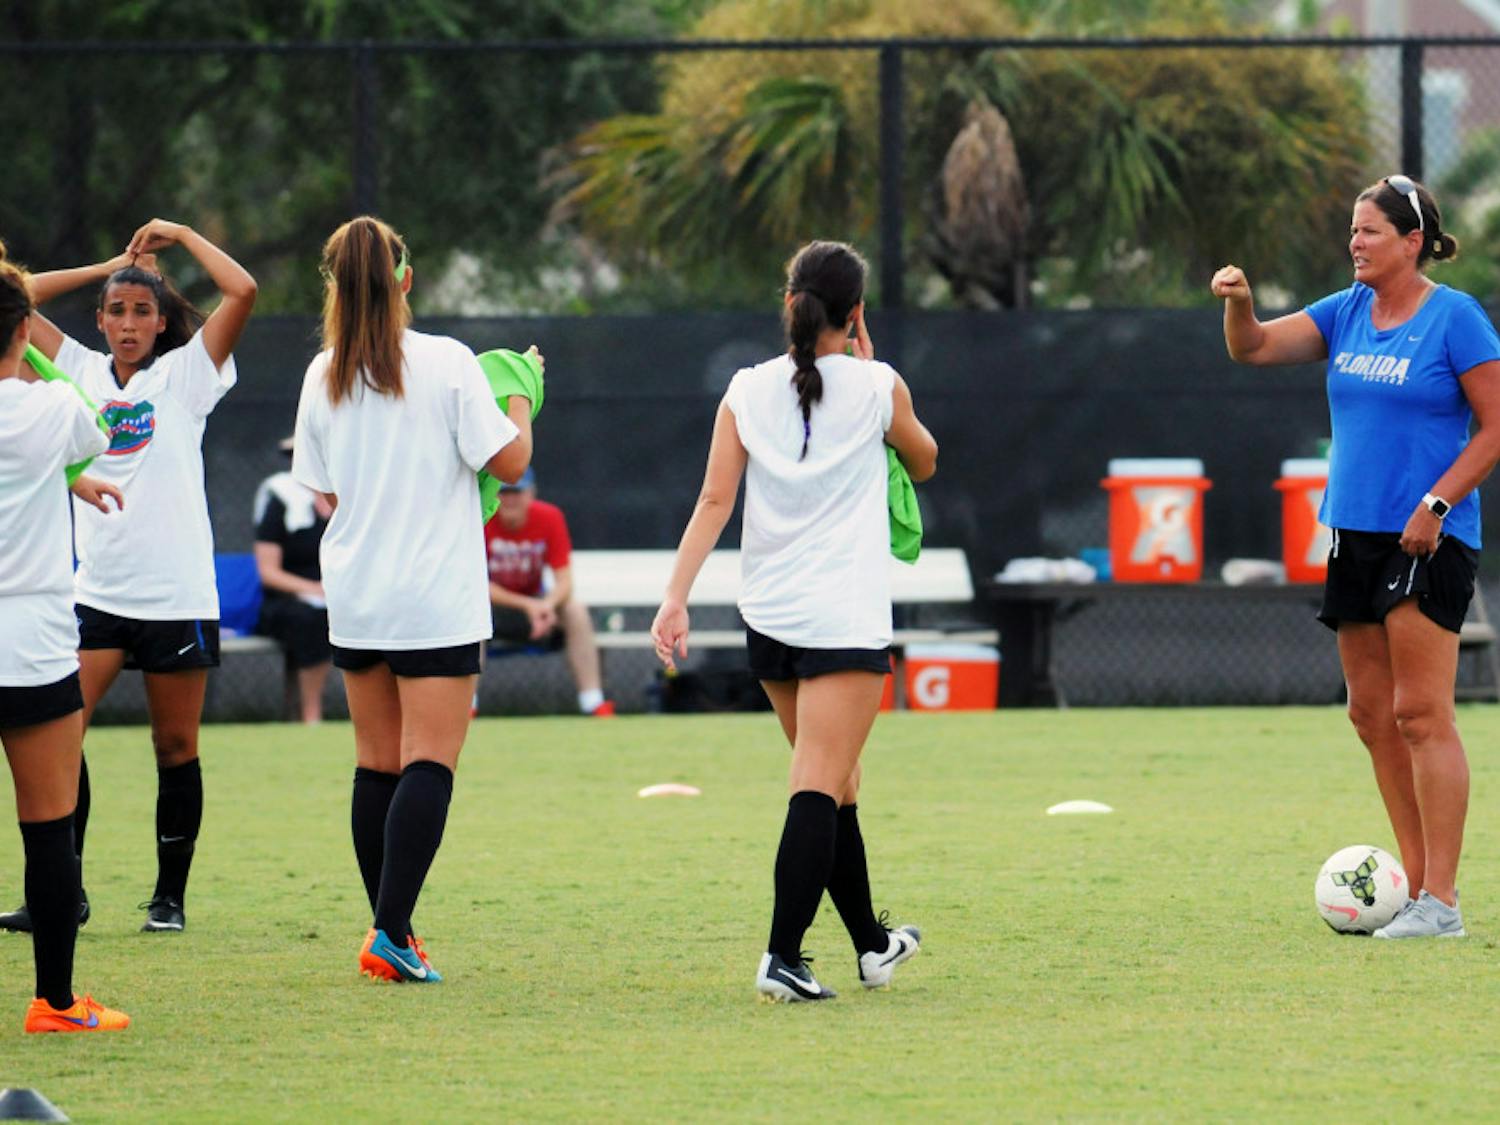 UF soccer coach Becky Burleigh leads practice prior to Florida's 2-1 win against Troy in an exhibition match on Aug. 11, 2015, at the soccer practice field at Donald R. Dizney Stadium.